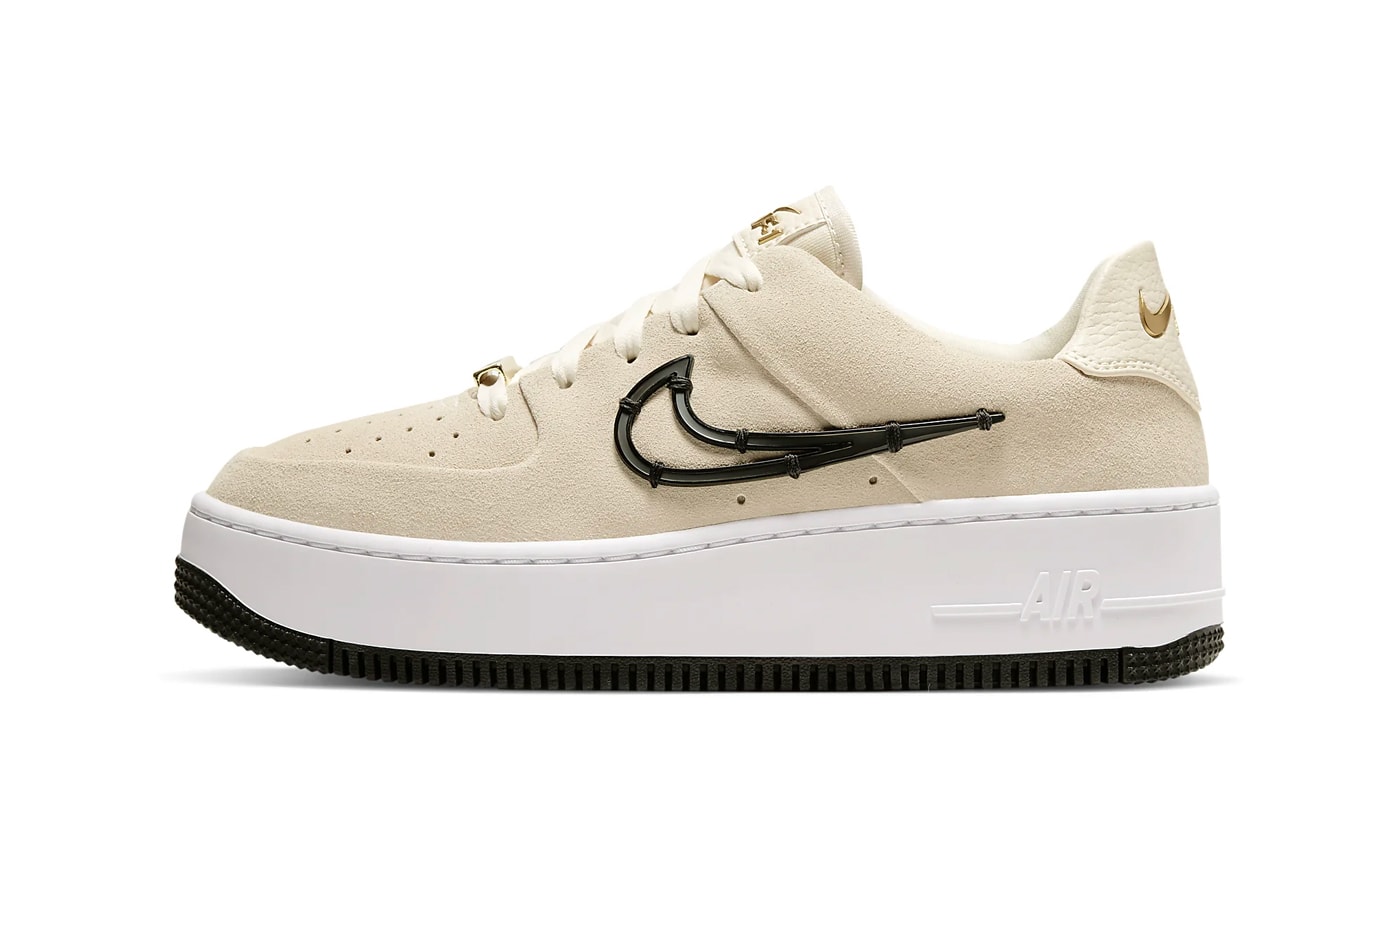 Nike Air Force 1 Sage Low LX Light Cream Release CI3482-200